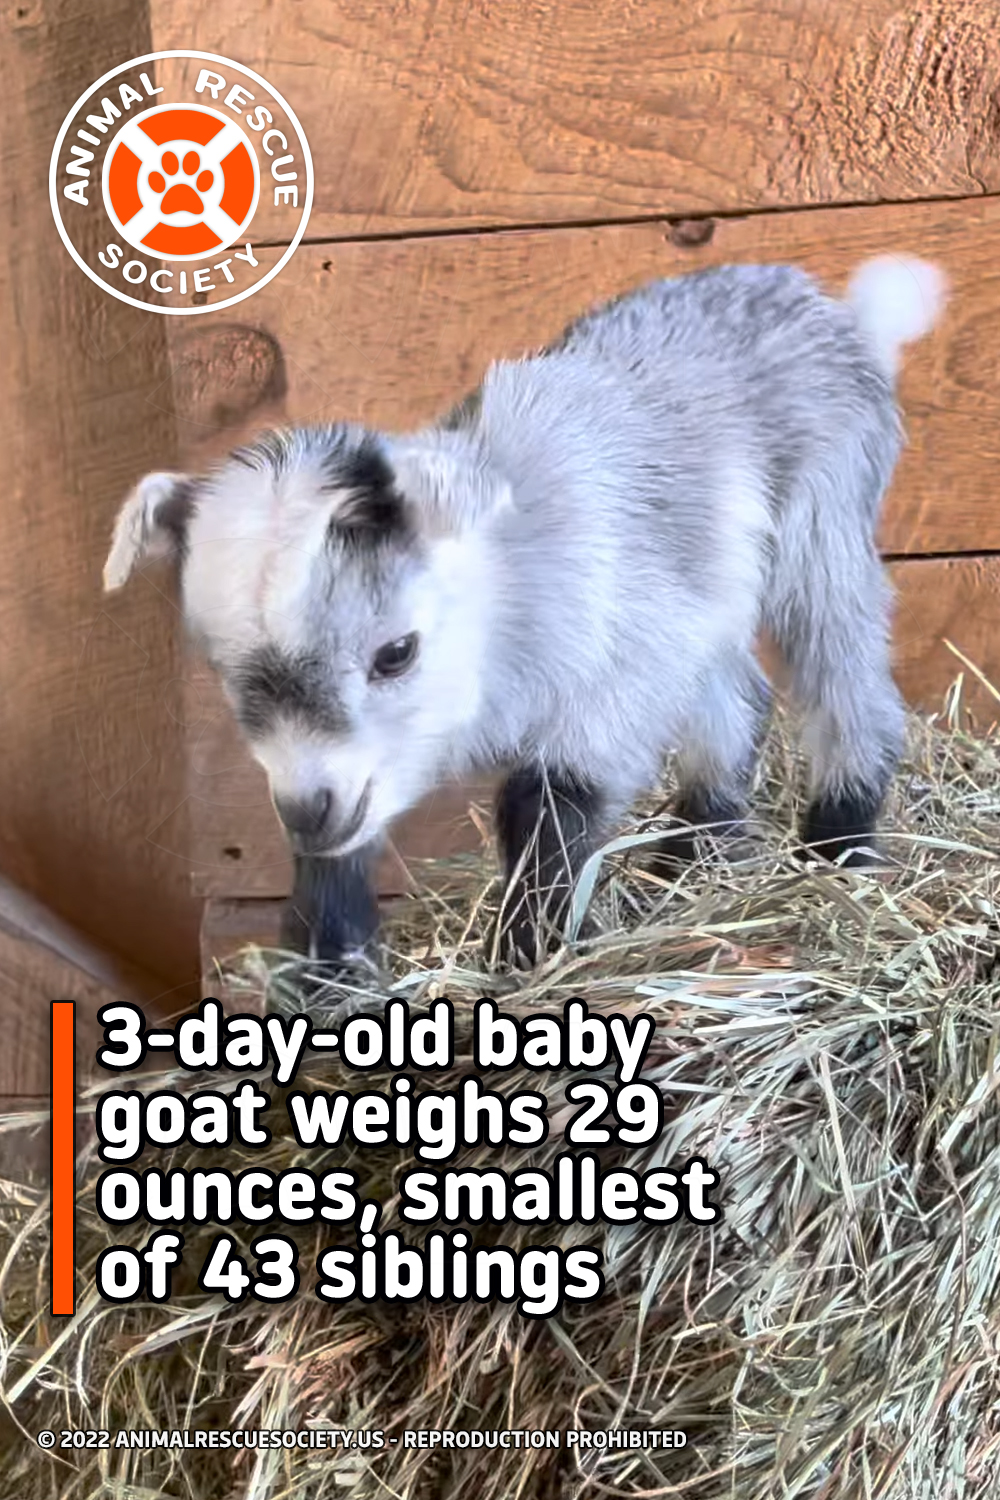 3-day-old baby goat weighs 29 ounces, smallest of 43 siblings